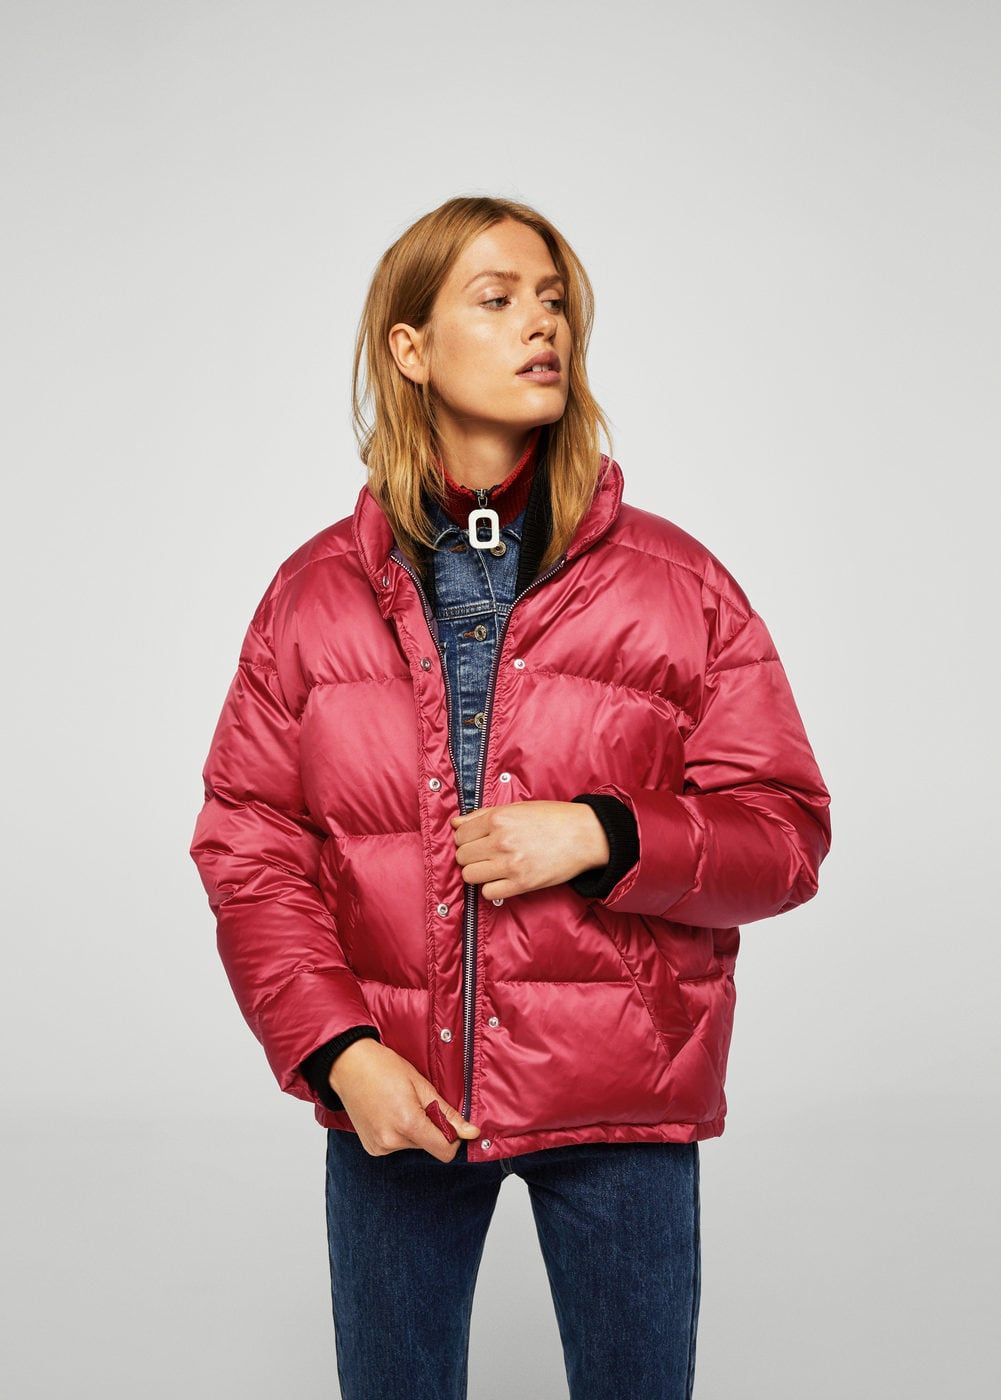 Puffer Weather Is Here & Gigi Hadid's Go-To Is Only $60